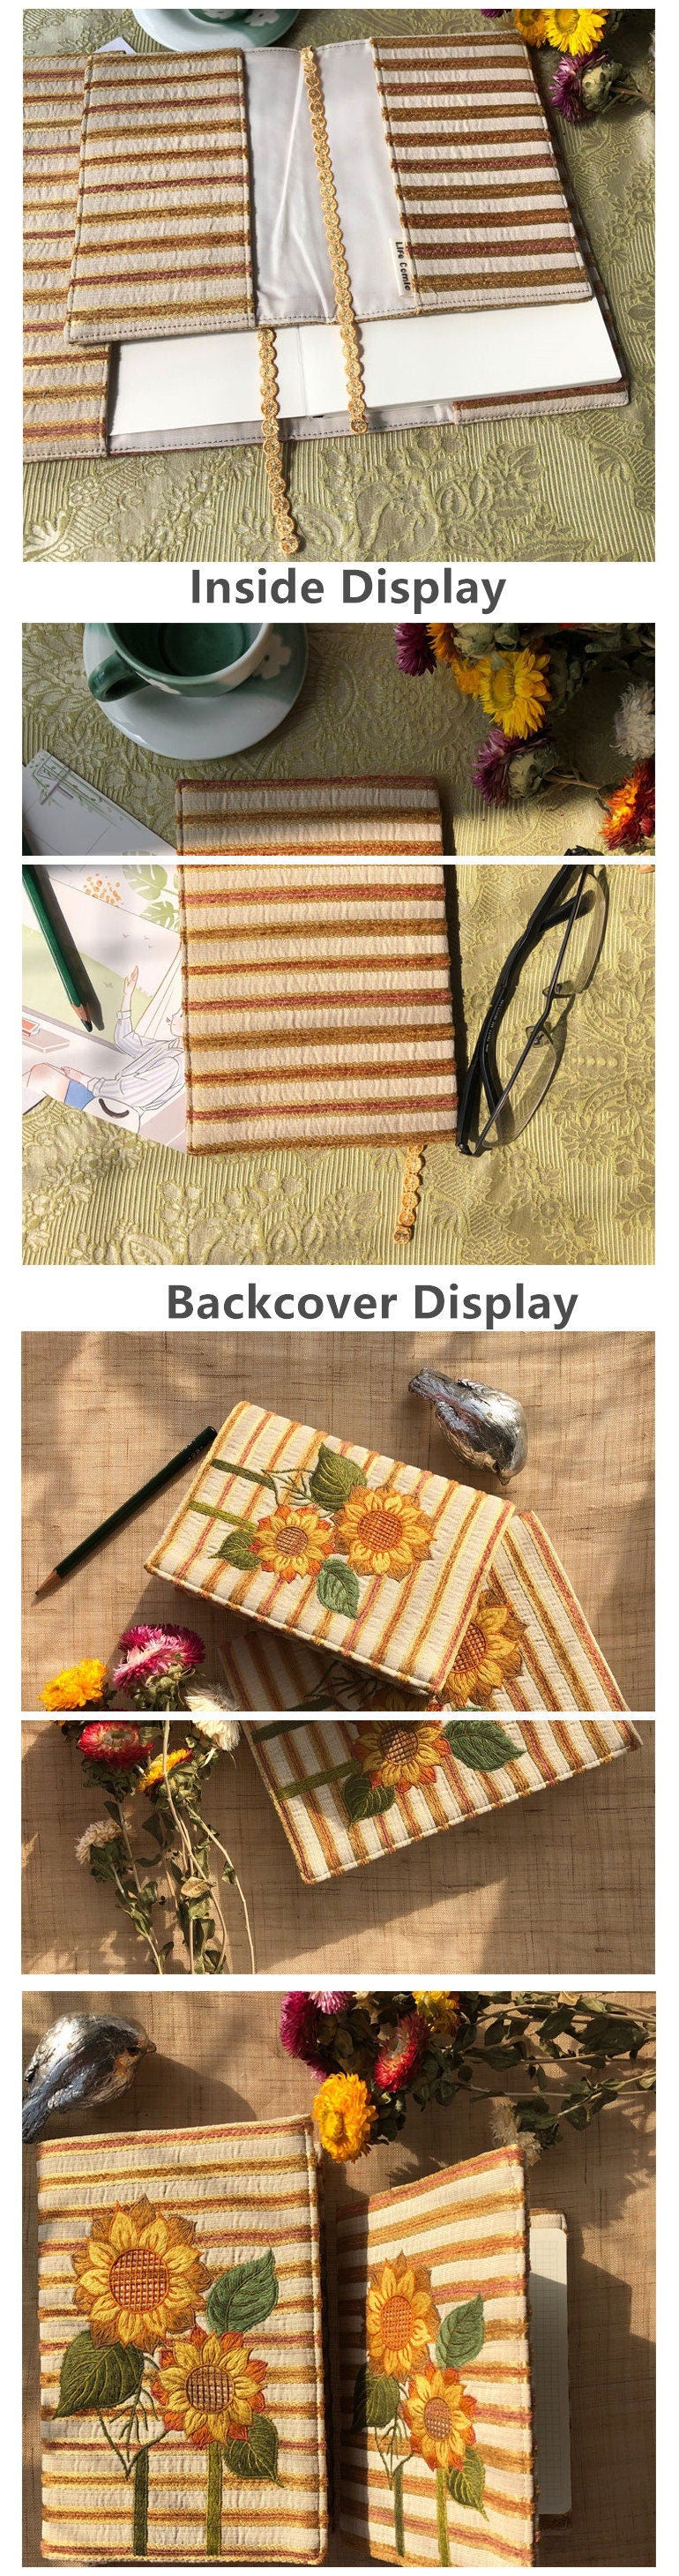 Sunflower Embroidery Book Jacket A5 B6 A6 Handmade Cloth Book Sleeve Floral Embroidered Book Protector Blank Grid Pages Retro Notebook Gift